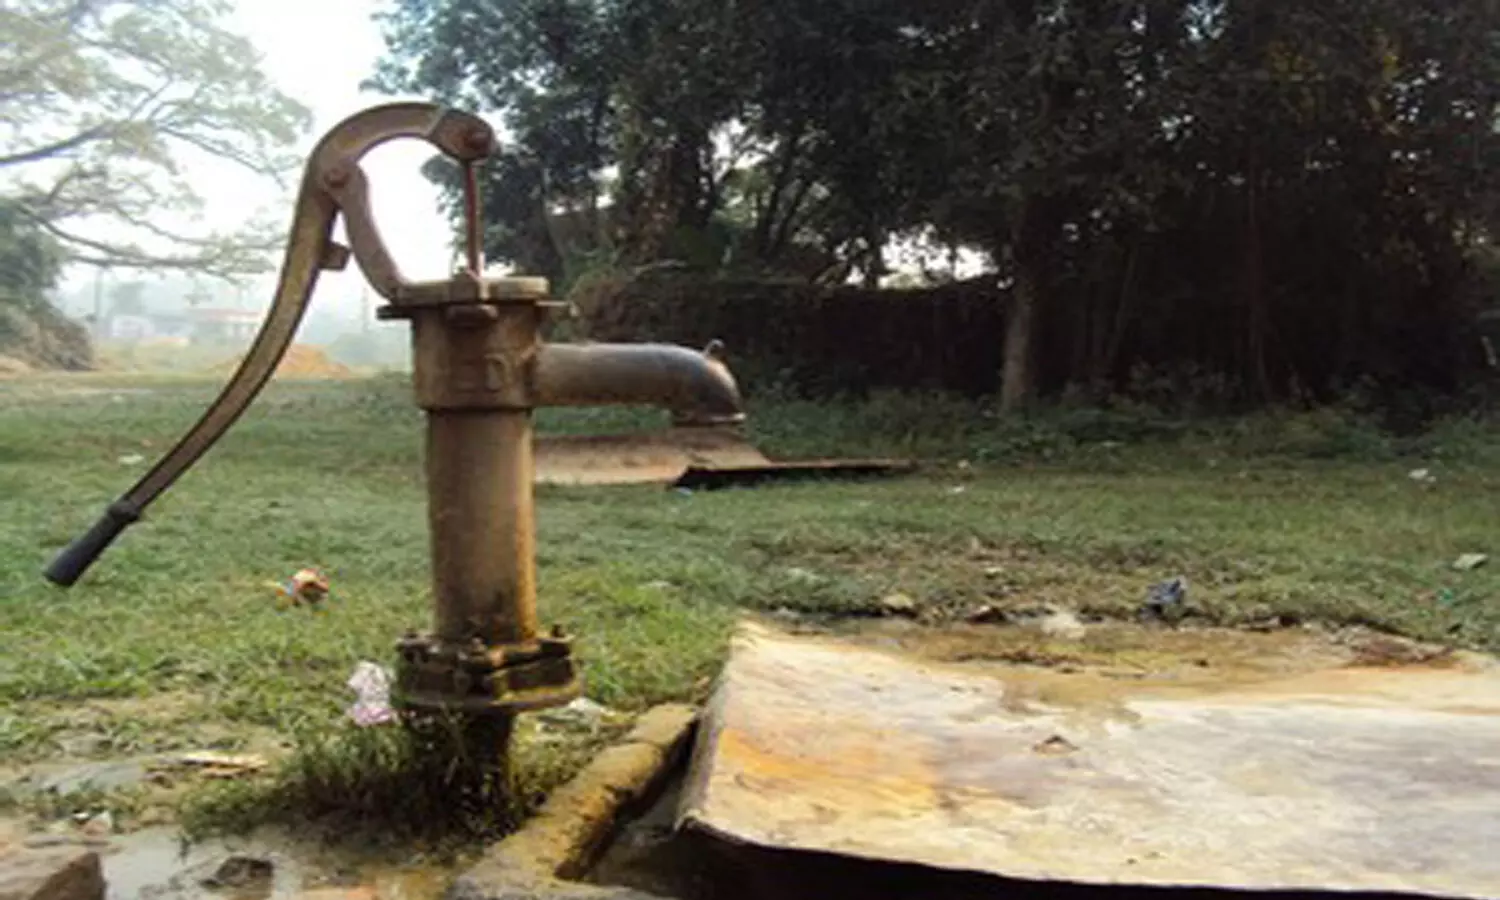 Have you ever seen Blue water from hand pump? It leaves everyone shocked in THIS village